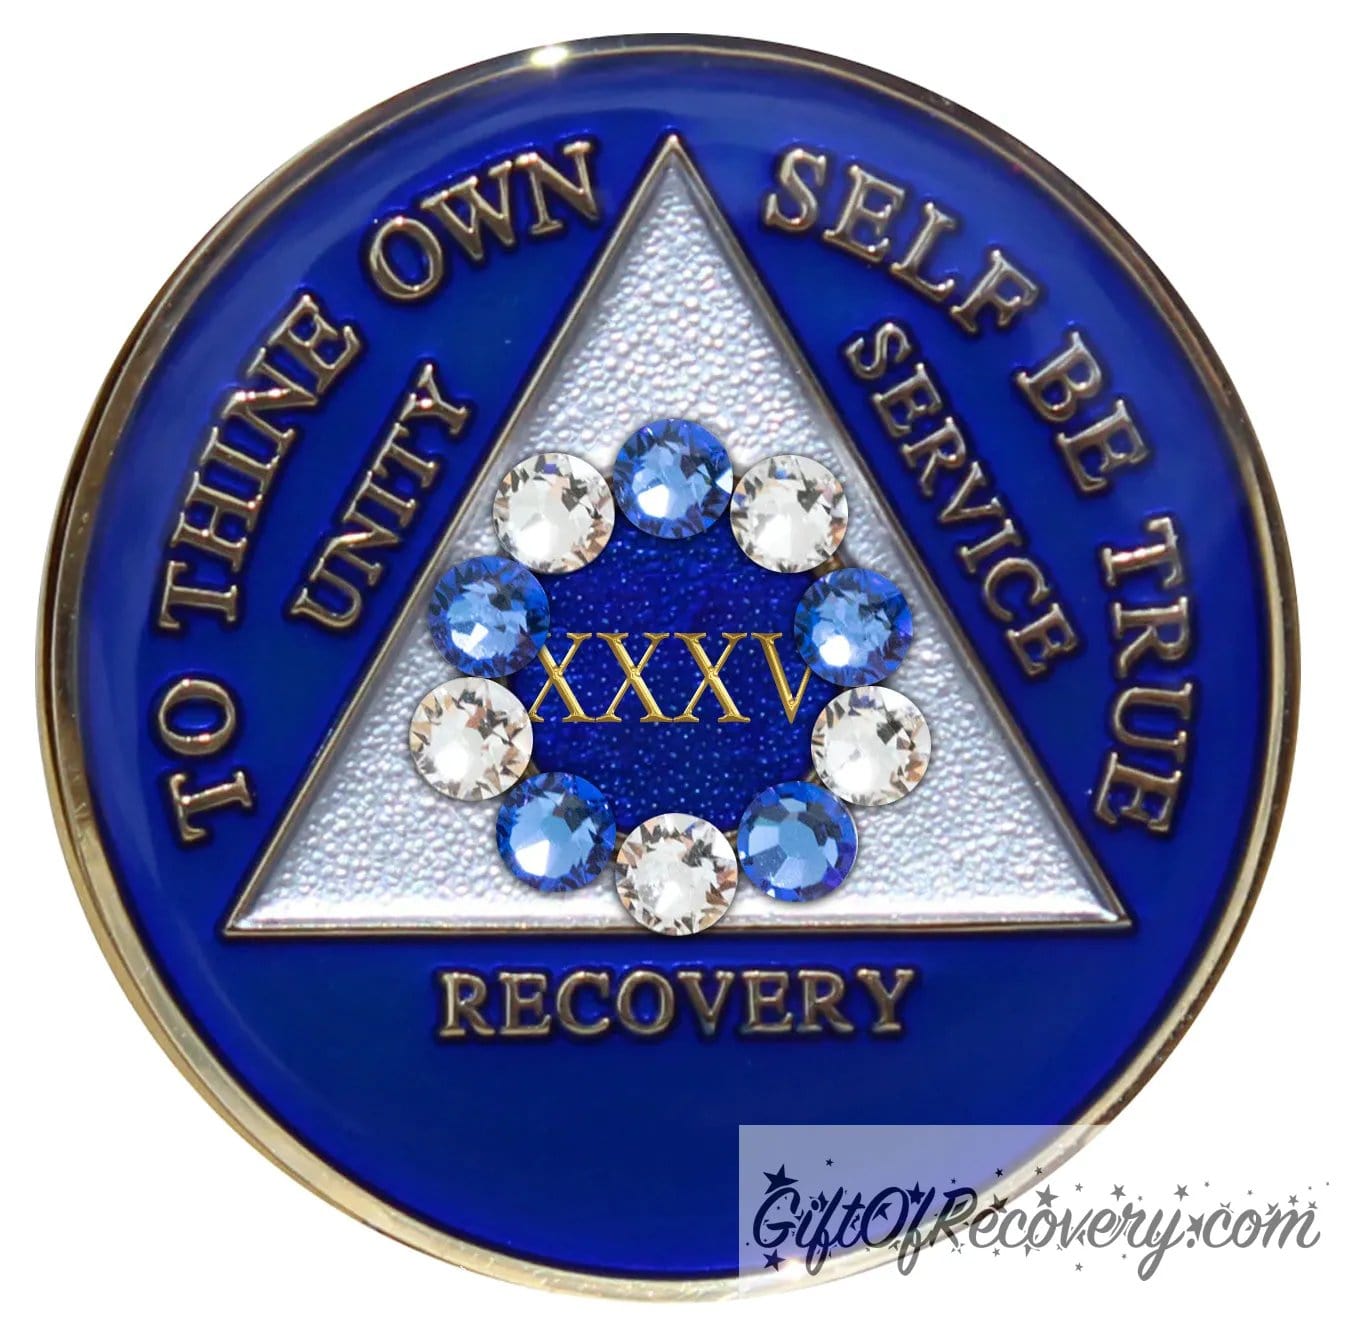 35 Year Big Book Blue AA medallion with 5 blue genuine crystals and 5 clear genuine crystal, making a circle around the 35 year, the recovery medallion has raised lettering to thine own self be true, and the outer rim of the medallion in 14k gold, inside the triangle is white and blue, emphasizing action and reflection.